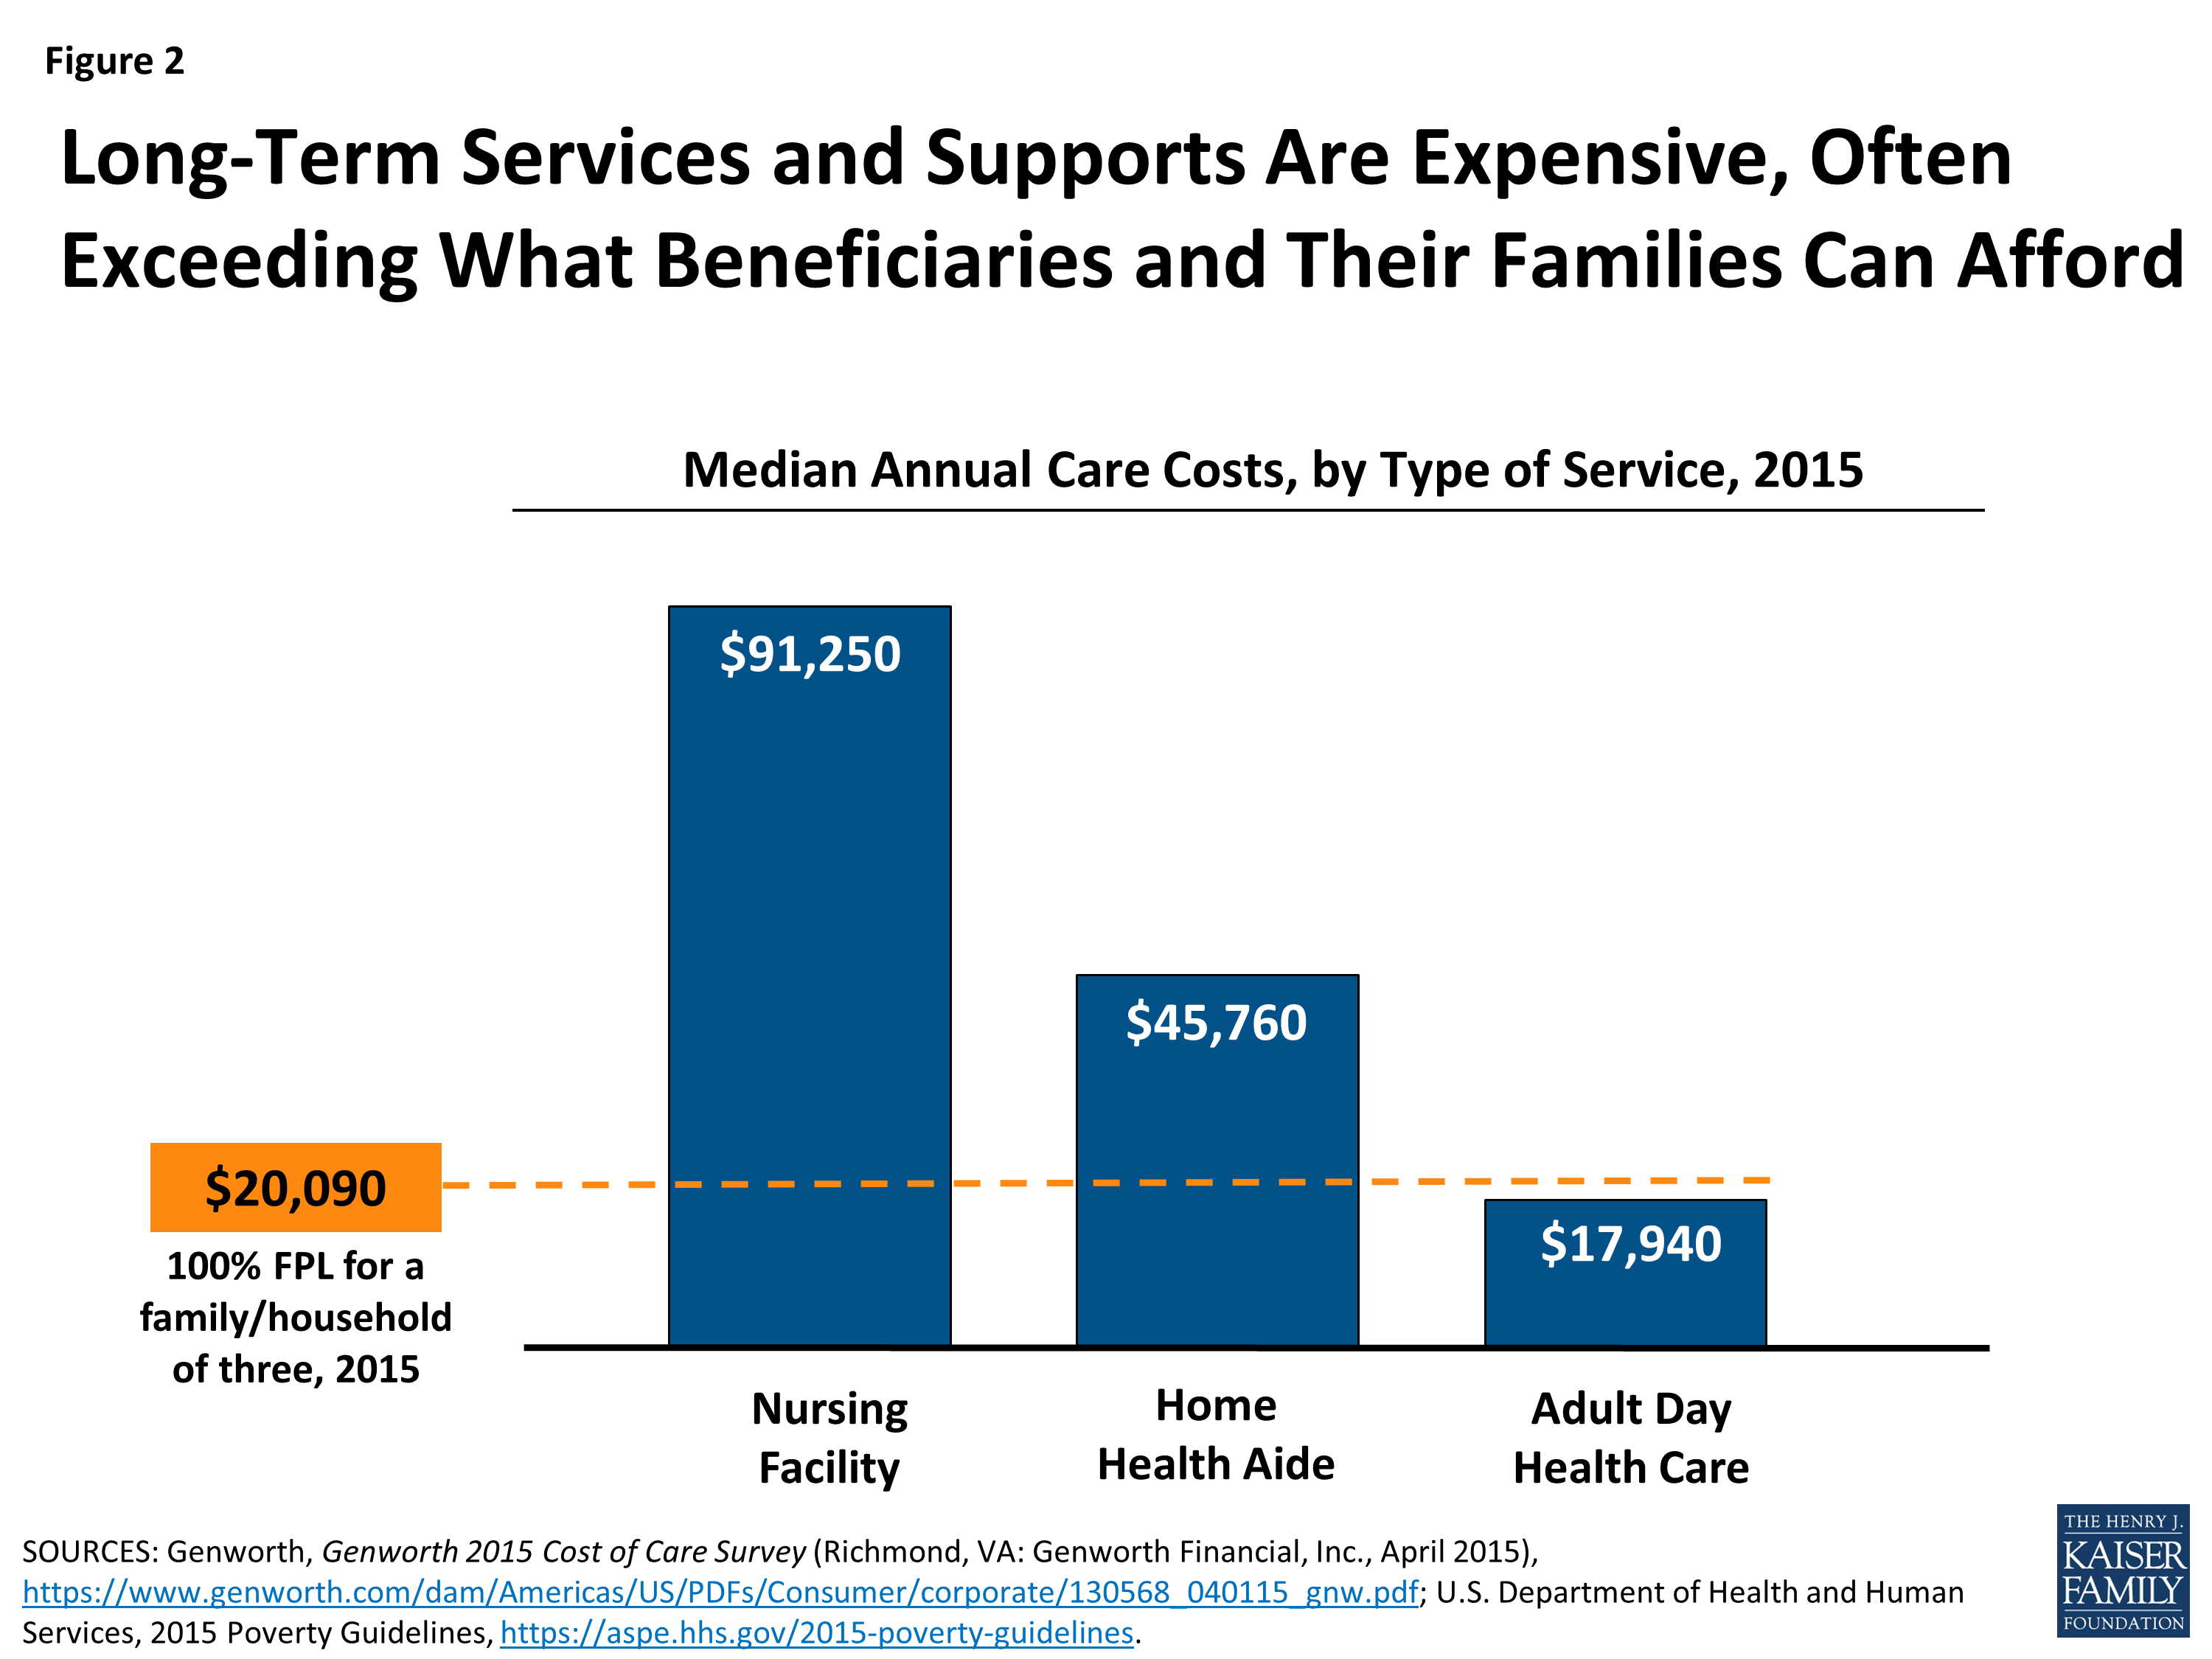 Long-Term Services and Supports Are Expensive-Often Exceeding What Beneficiaries and Their Families Can Afford.png